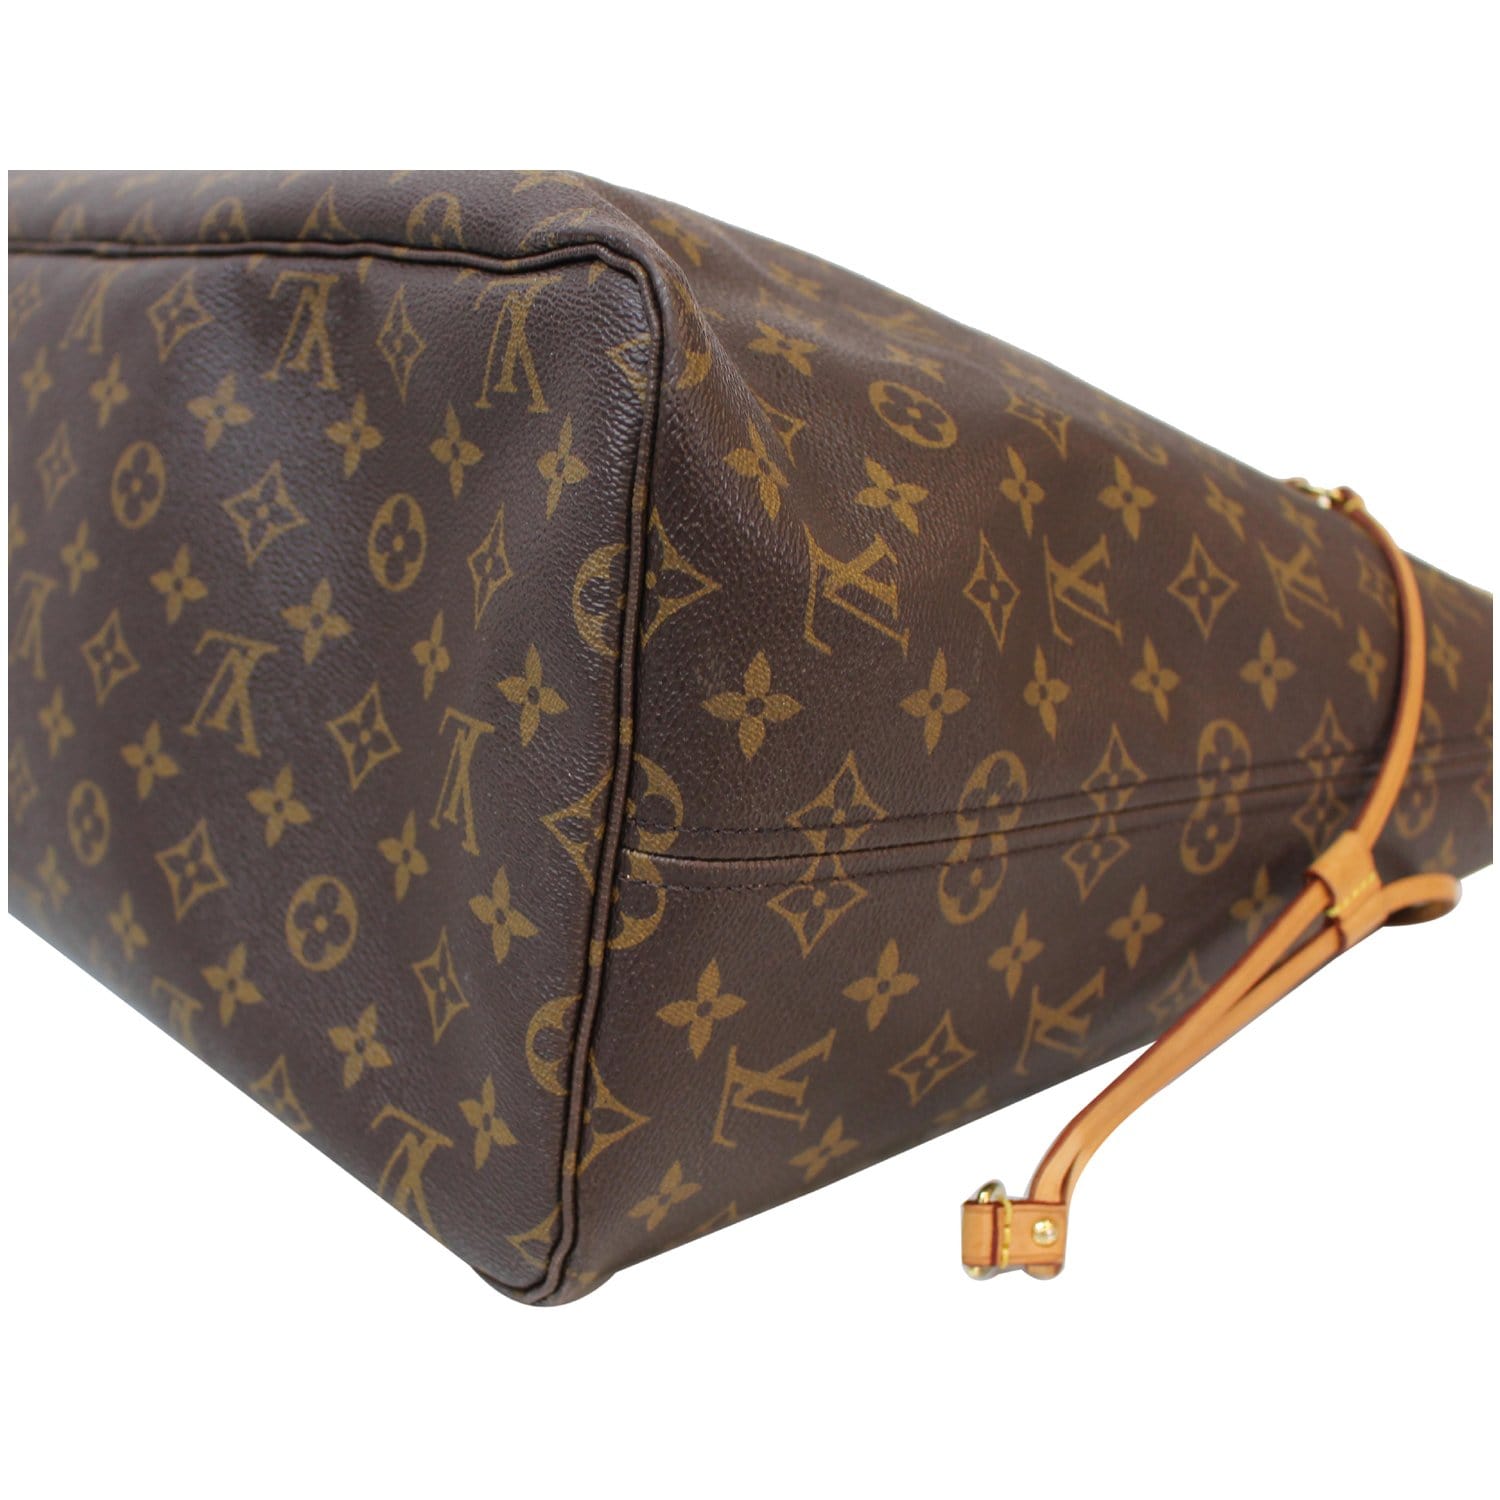 Louis+Vuitton+Neverfull+Monogram+Tote+GM+Brown+Canvas for sale online